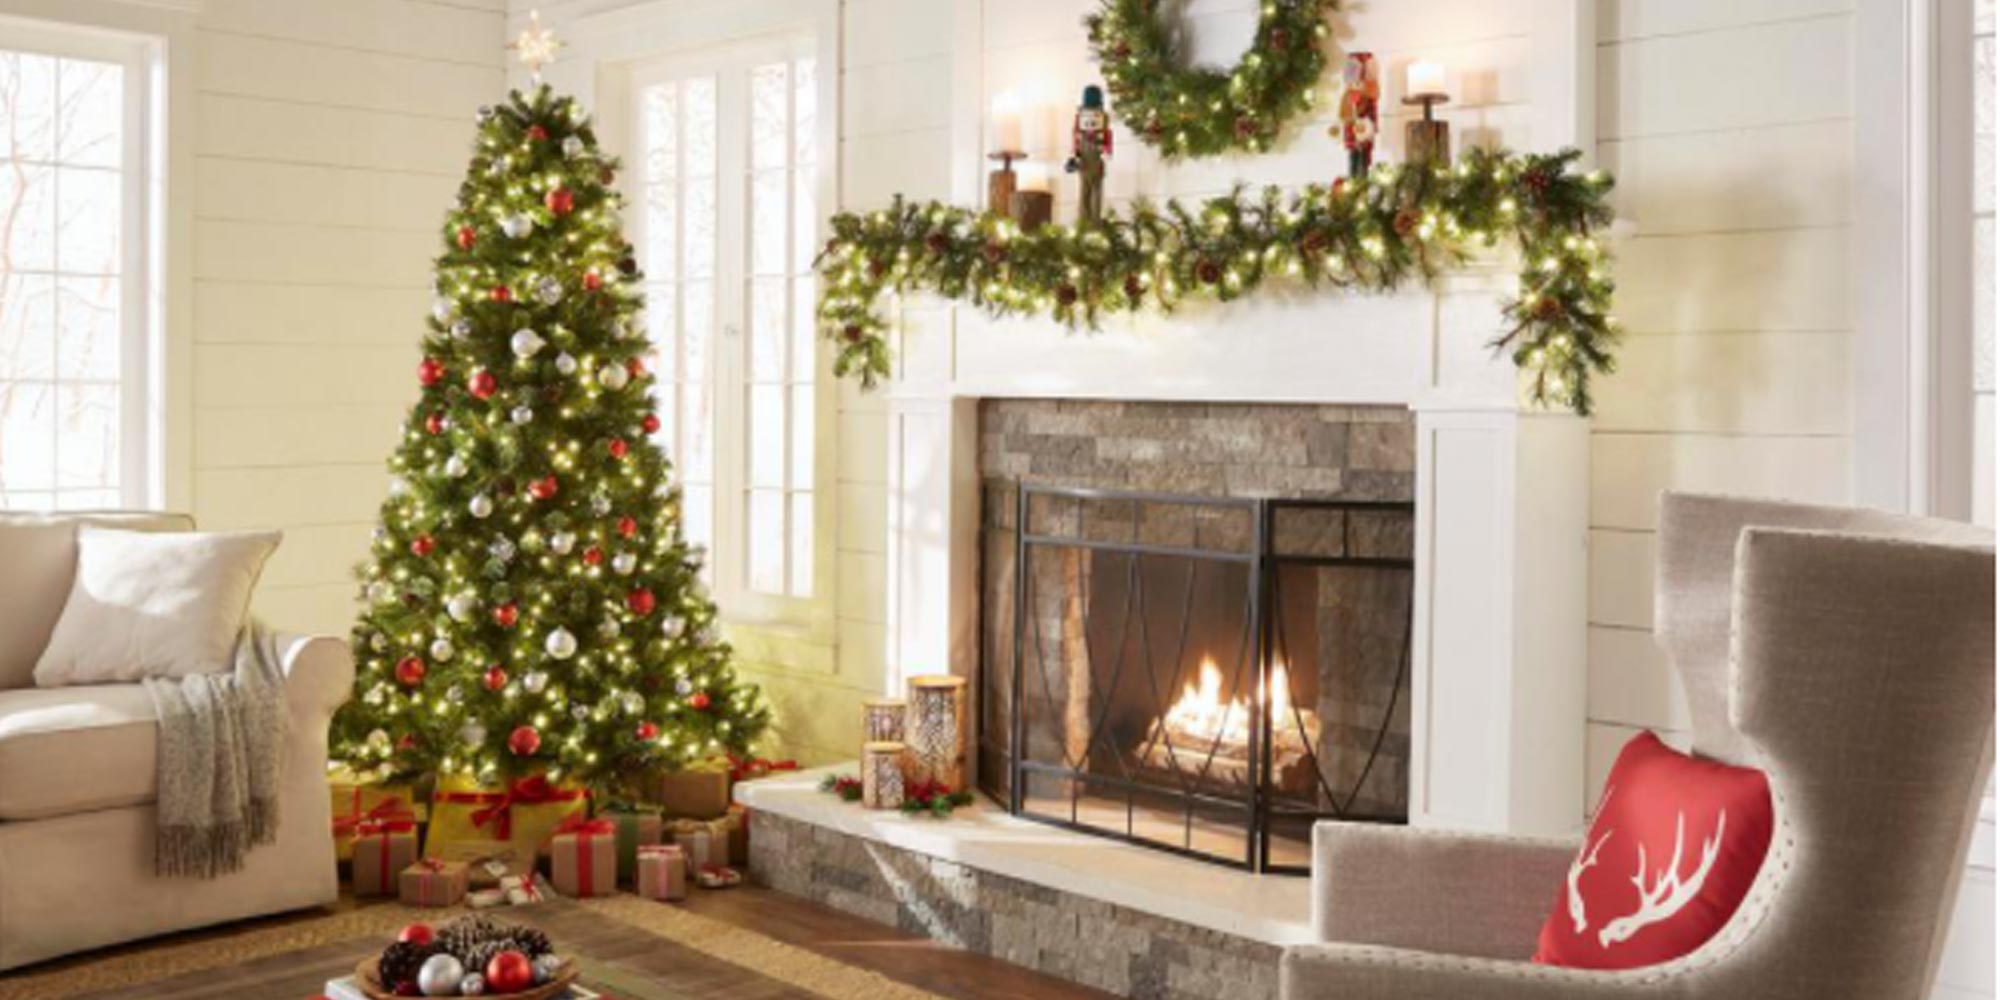 Home Depot's after Christmas sale offers up to 75% off trees